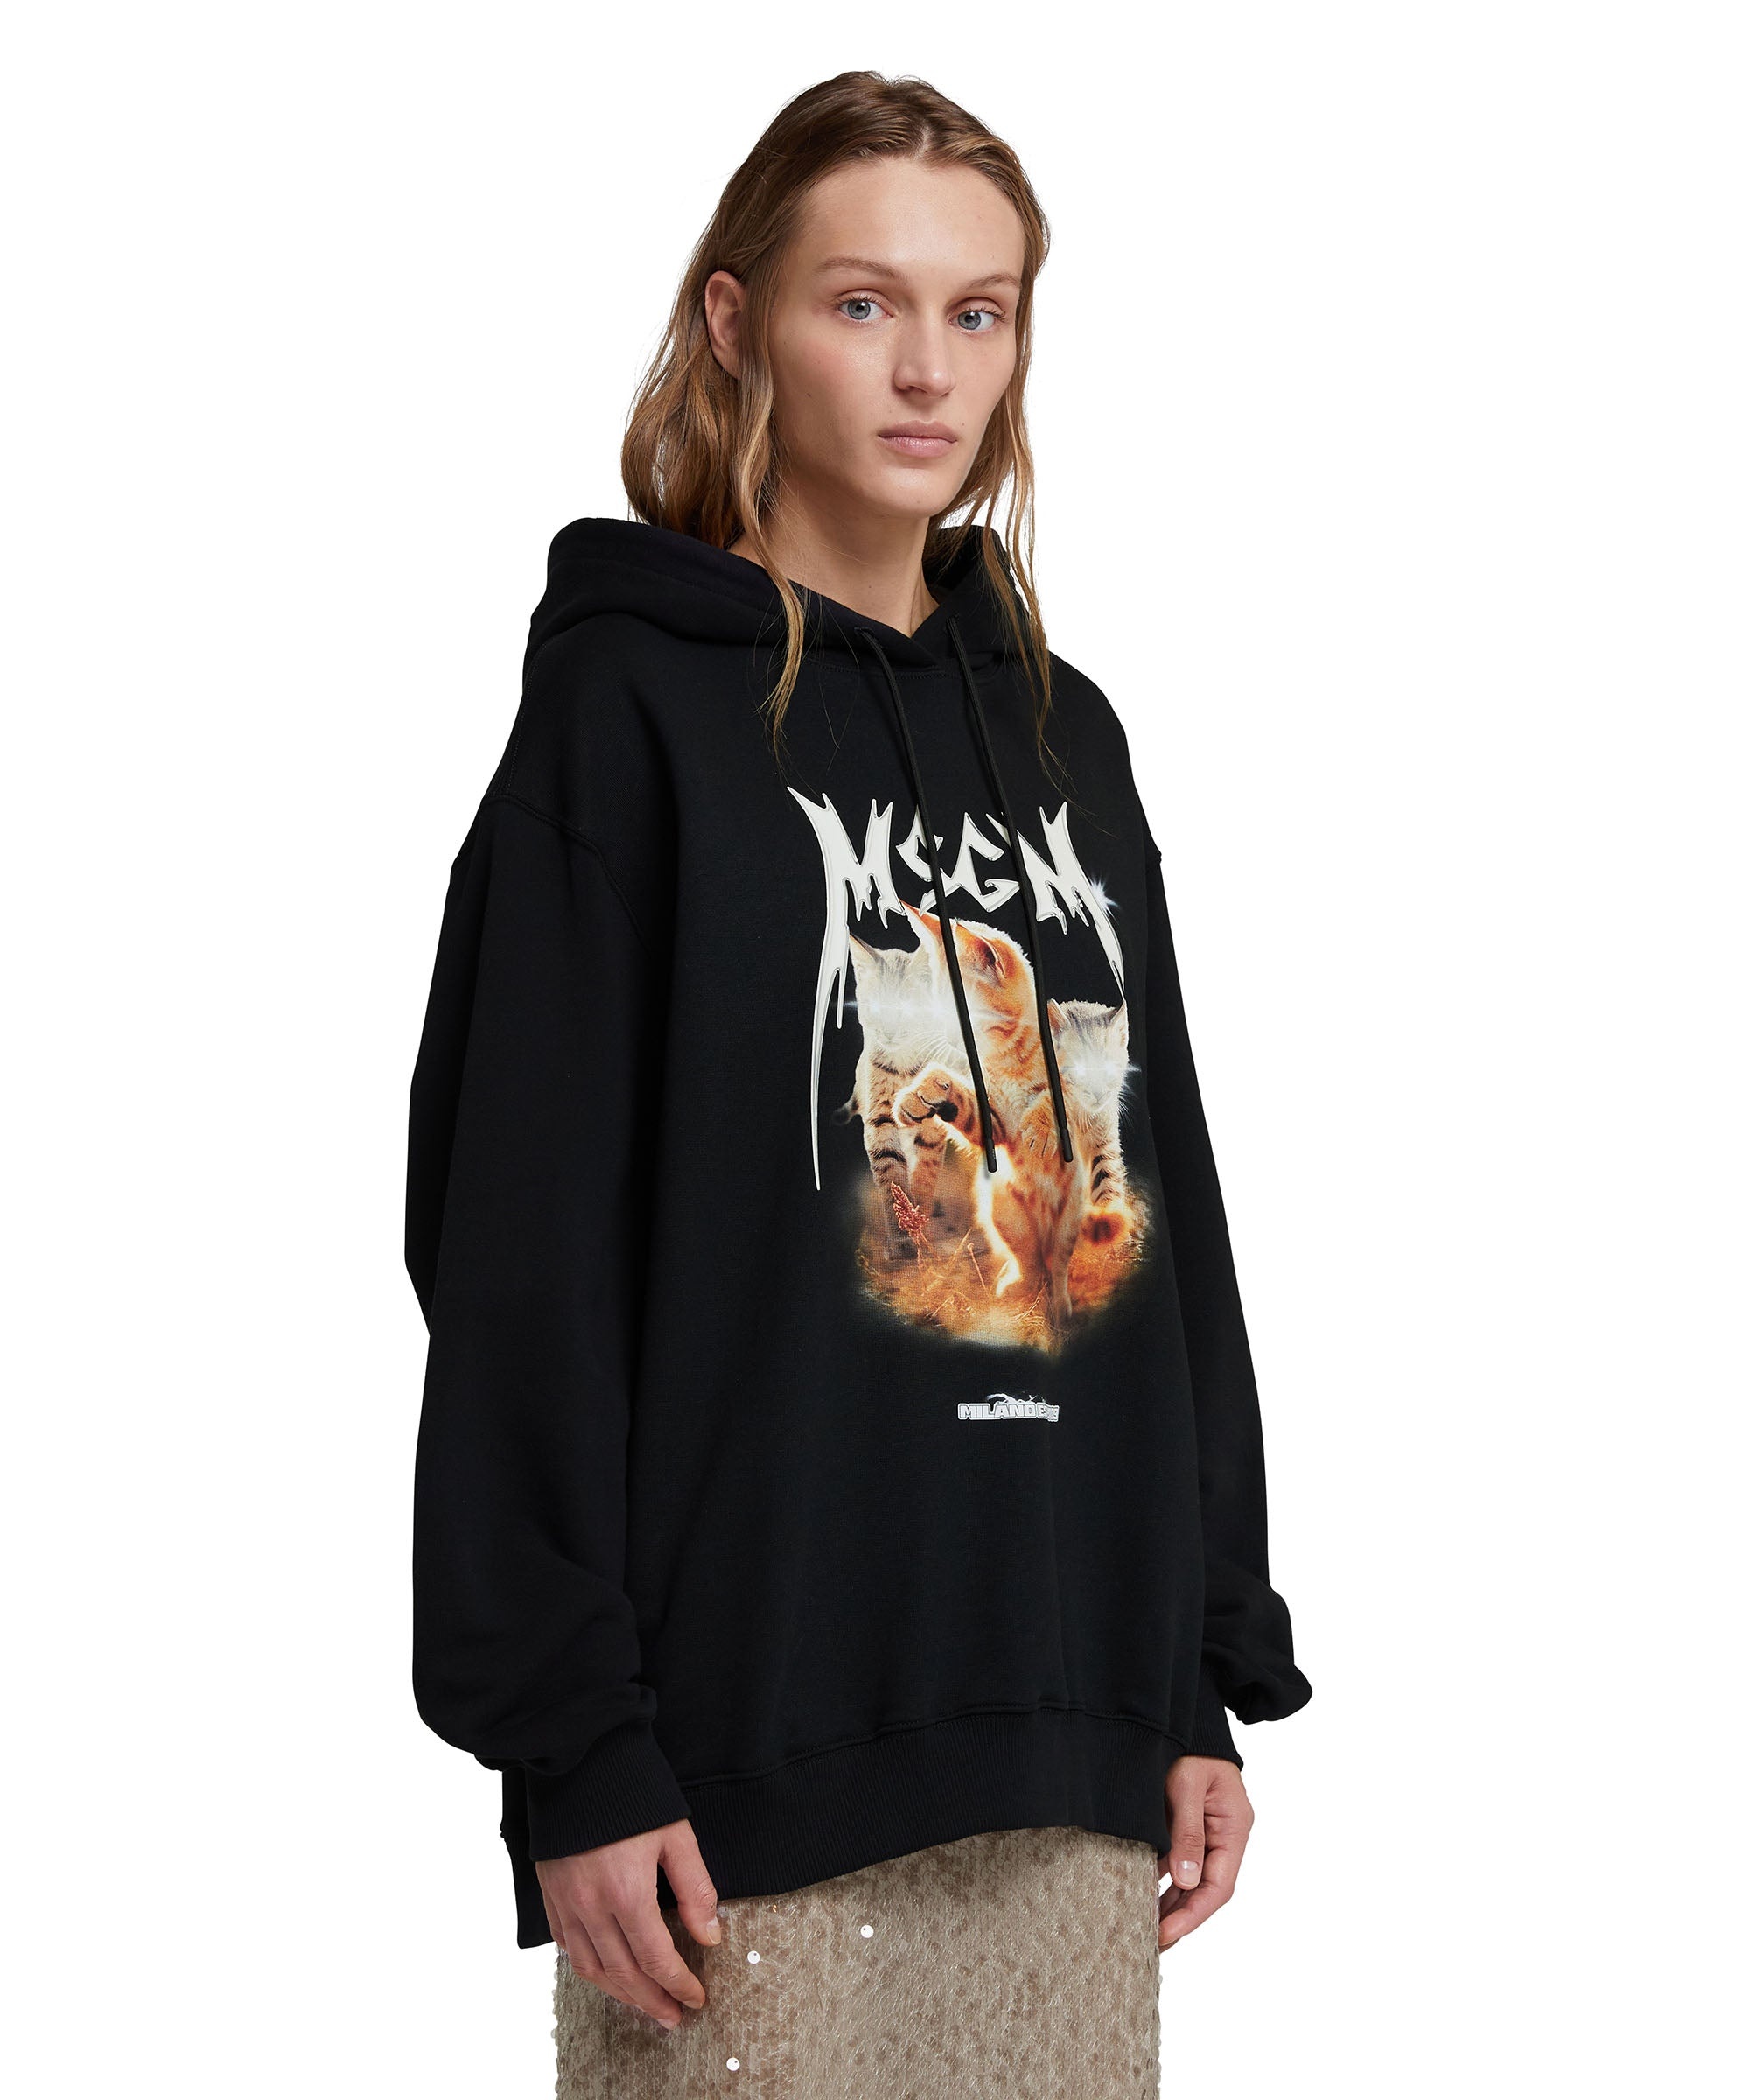 Hooded sweatshirt with "Laser eyed cat" graphic - 4